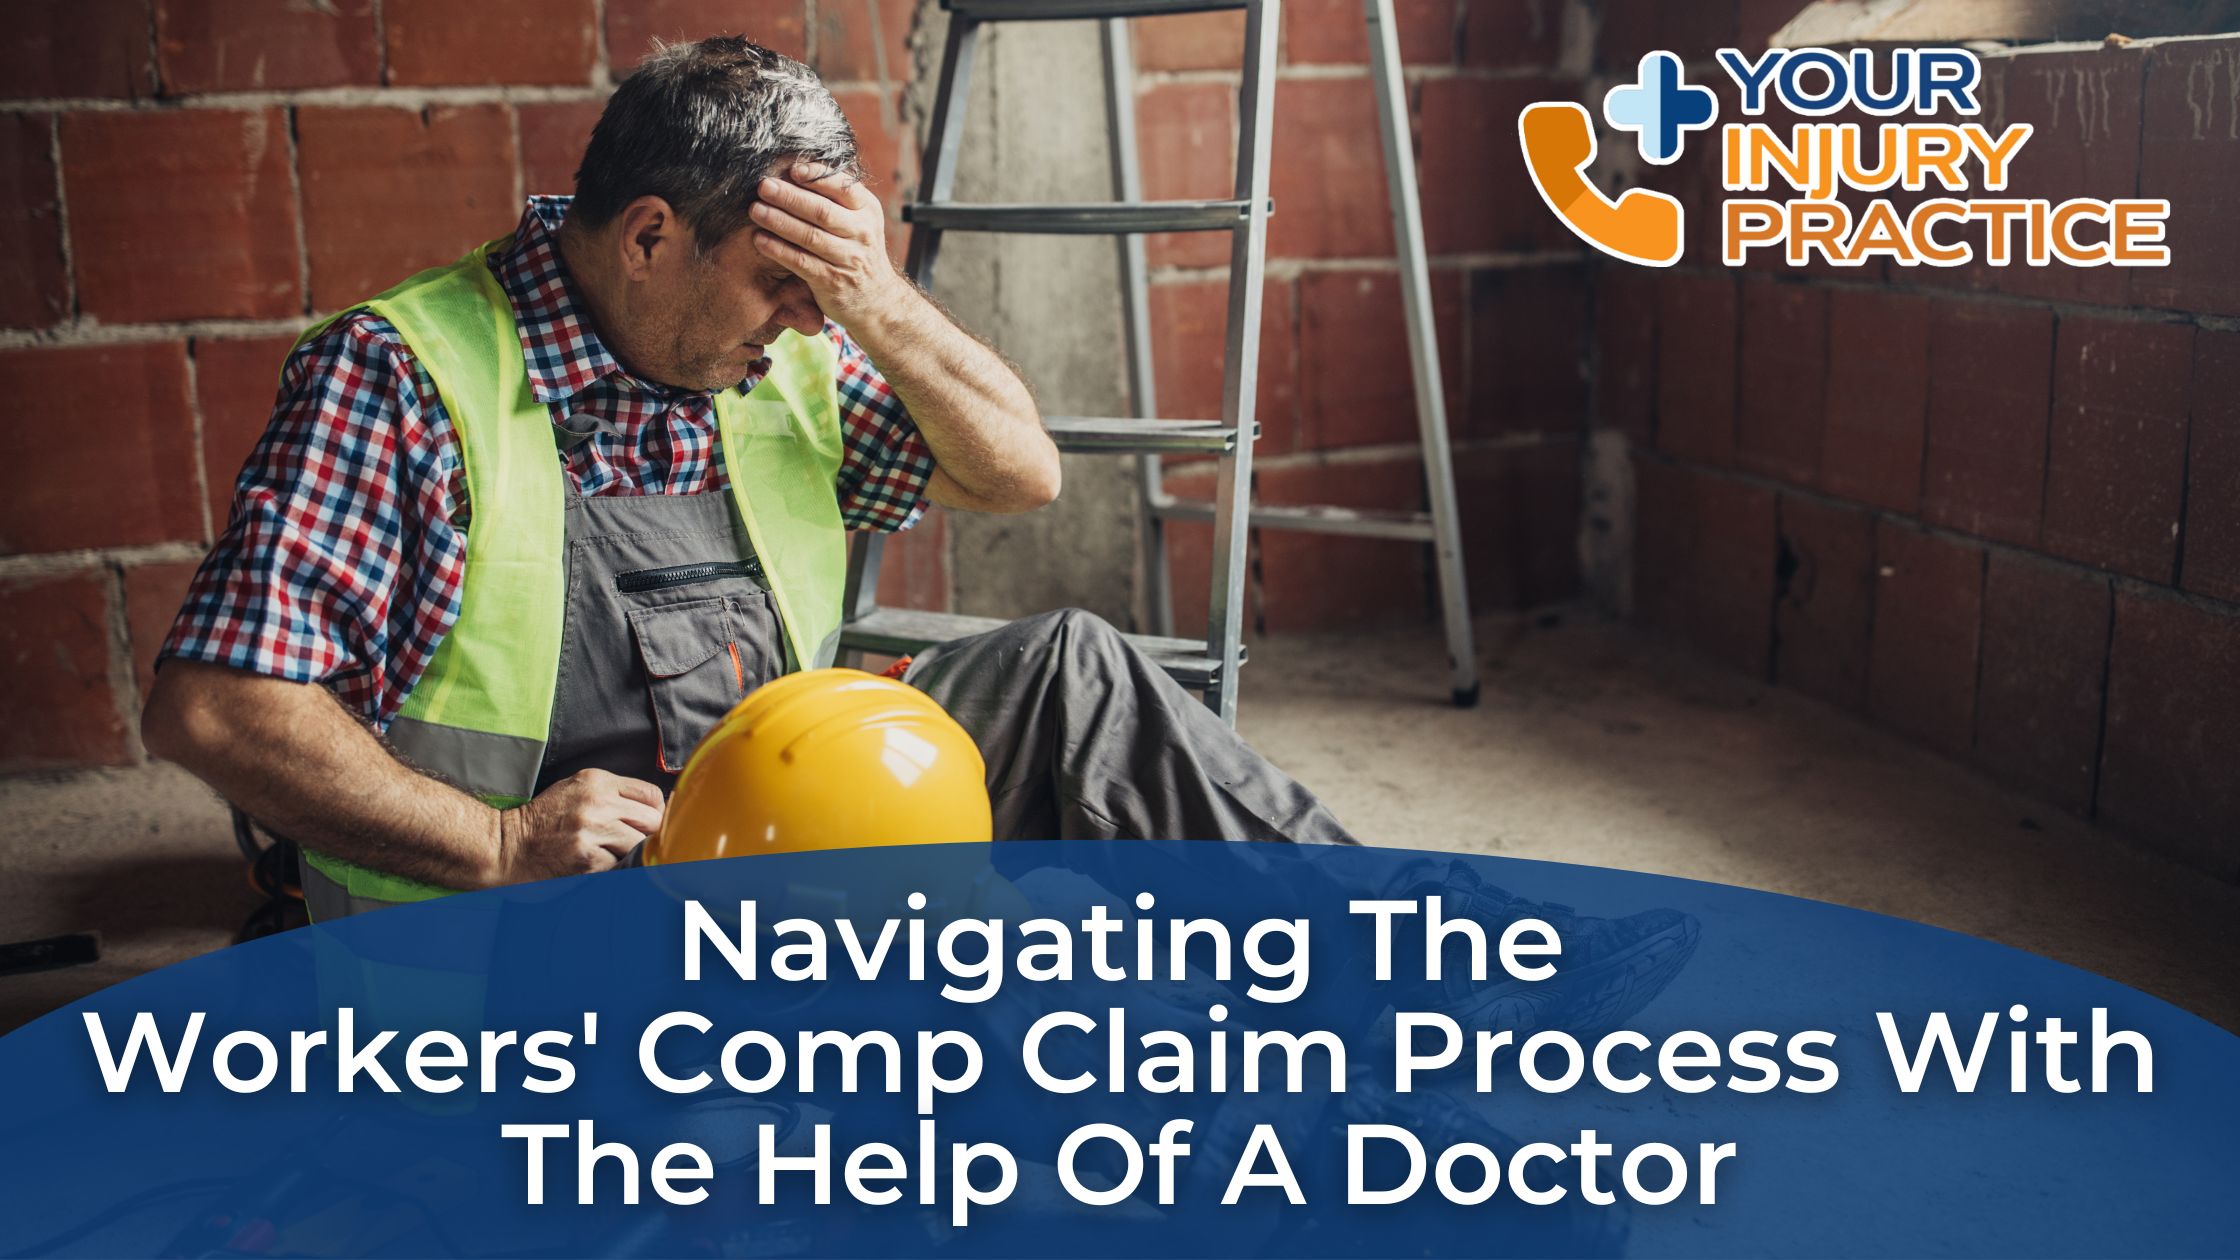 Navigating the Workers' Comp Claim Process with the Help of a Doctor